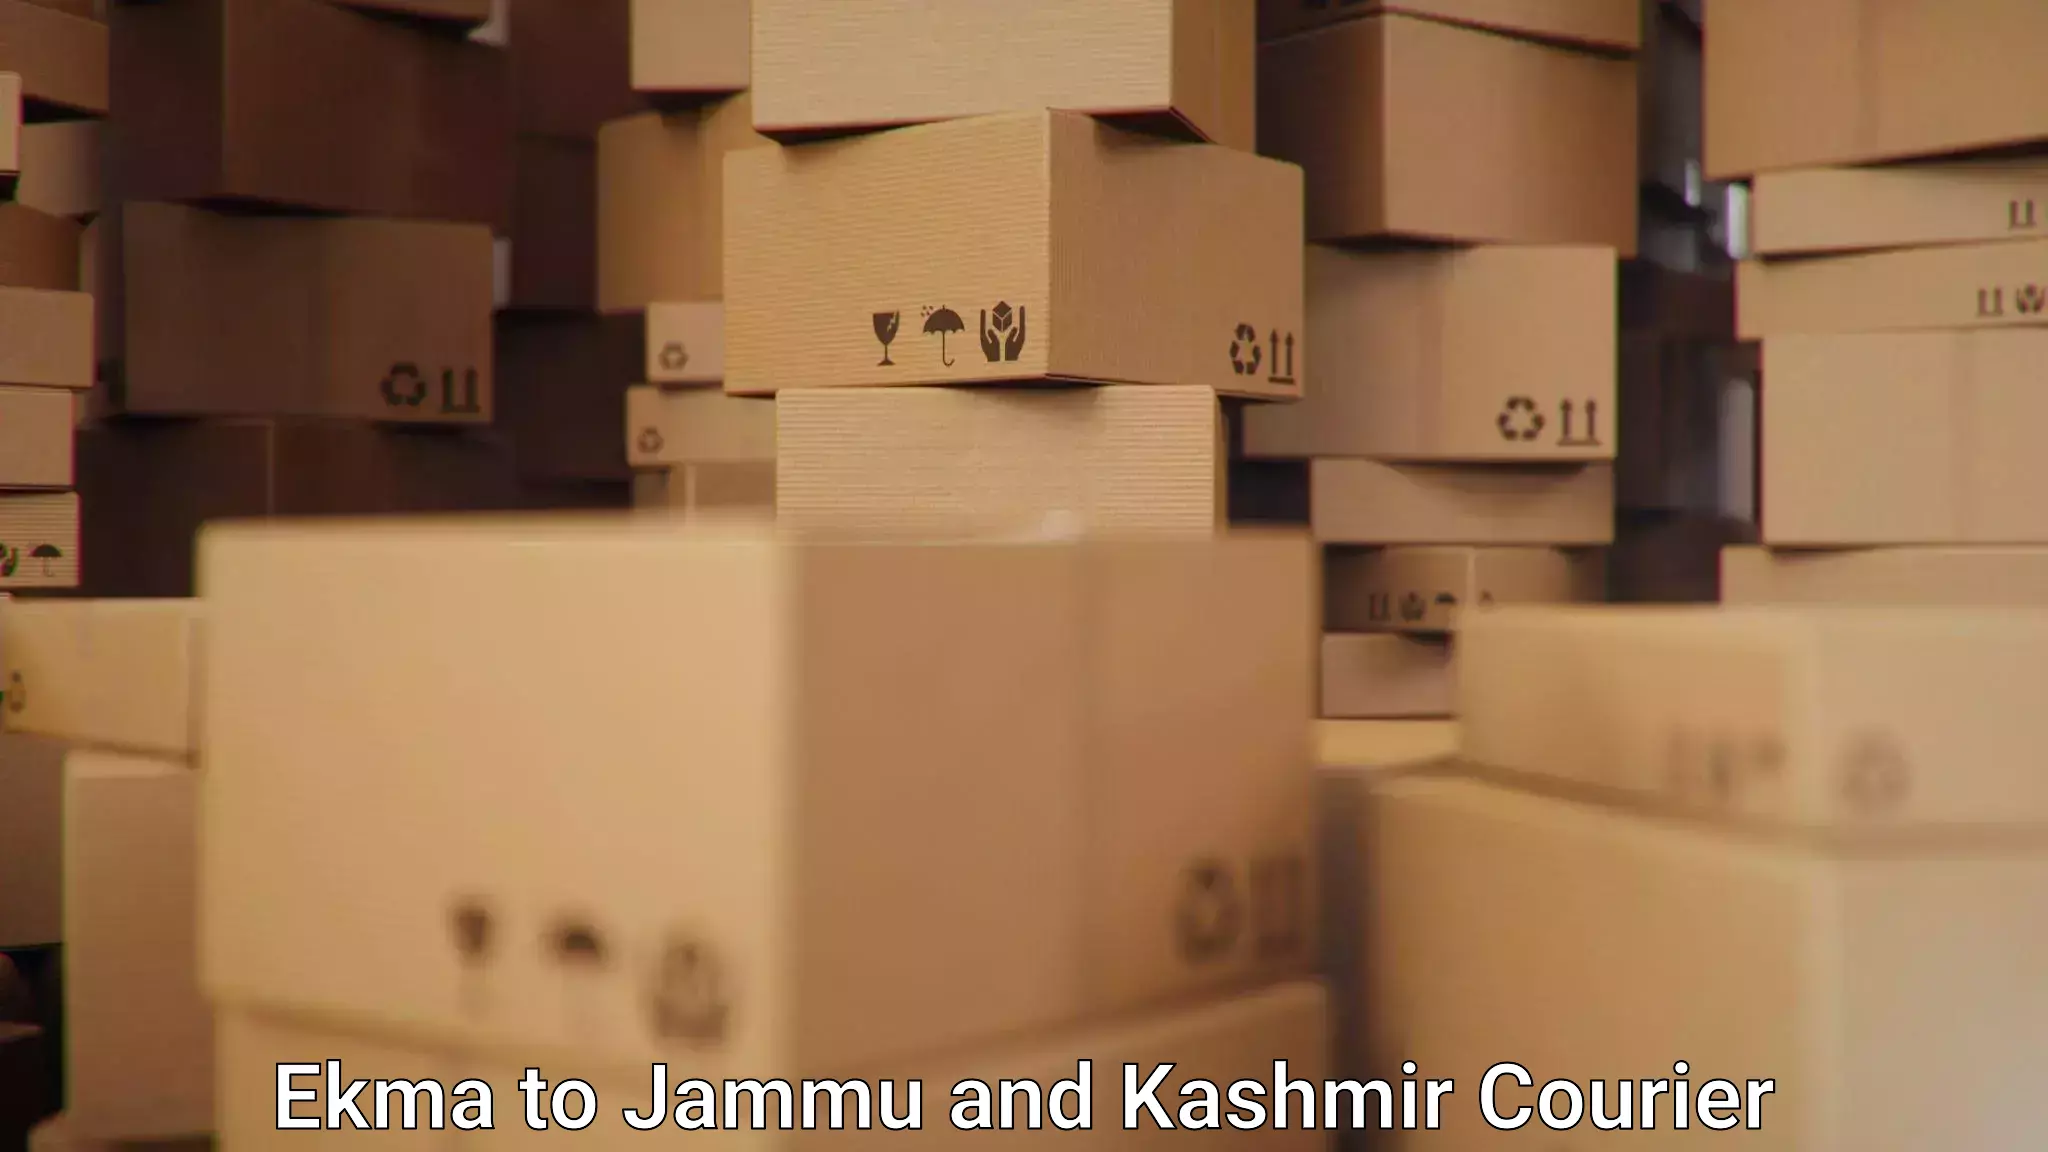 Cargo delivery service Ekma to Jammu and Kashmir